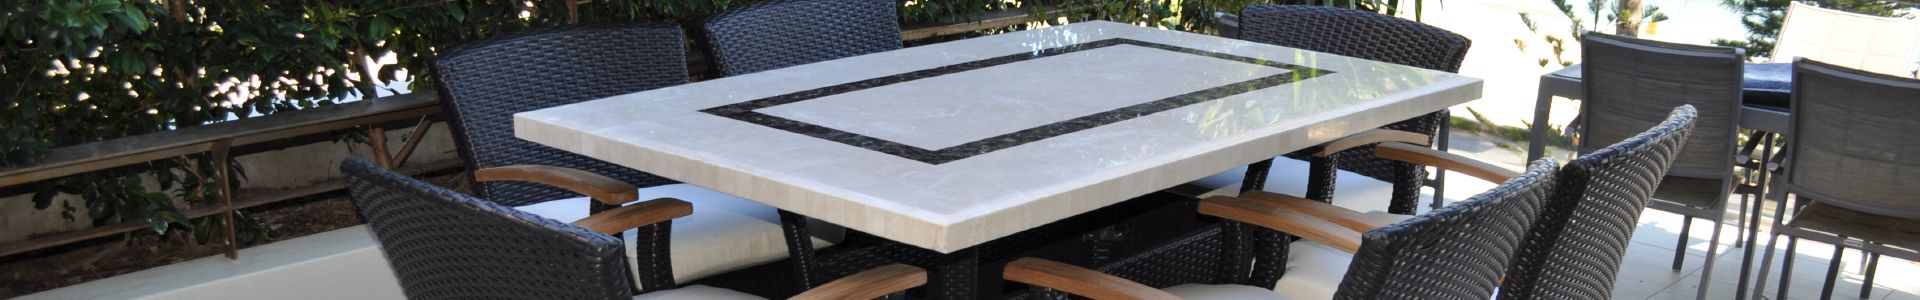 Bay Gallery Furniture Pertaining To Stone Top Outdoor Tables (View 12 of 15)